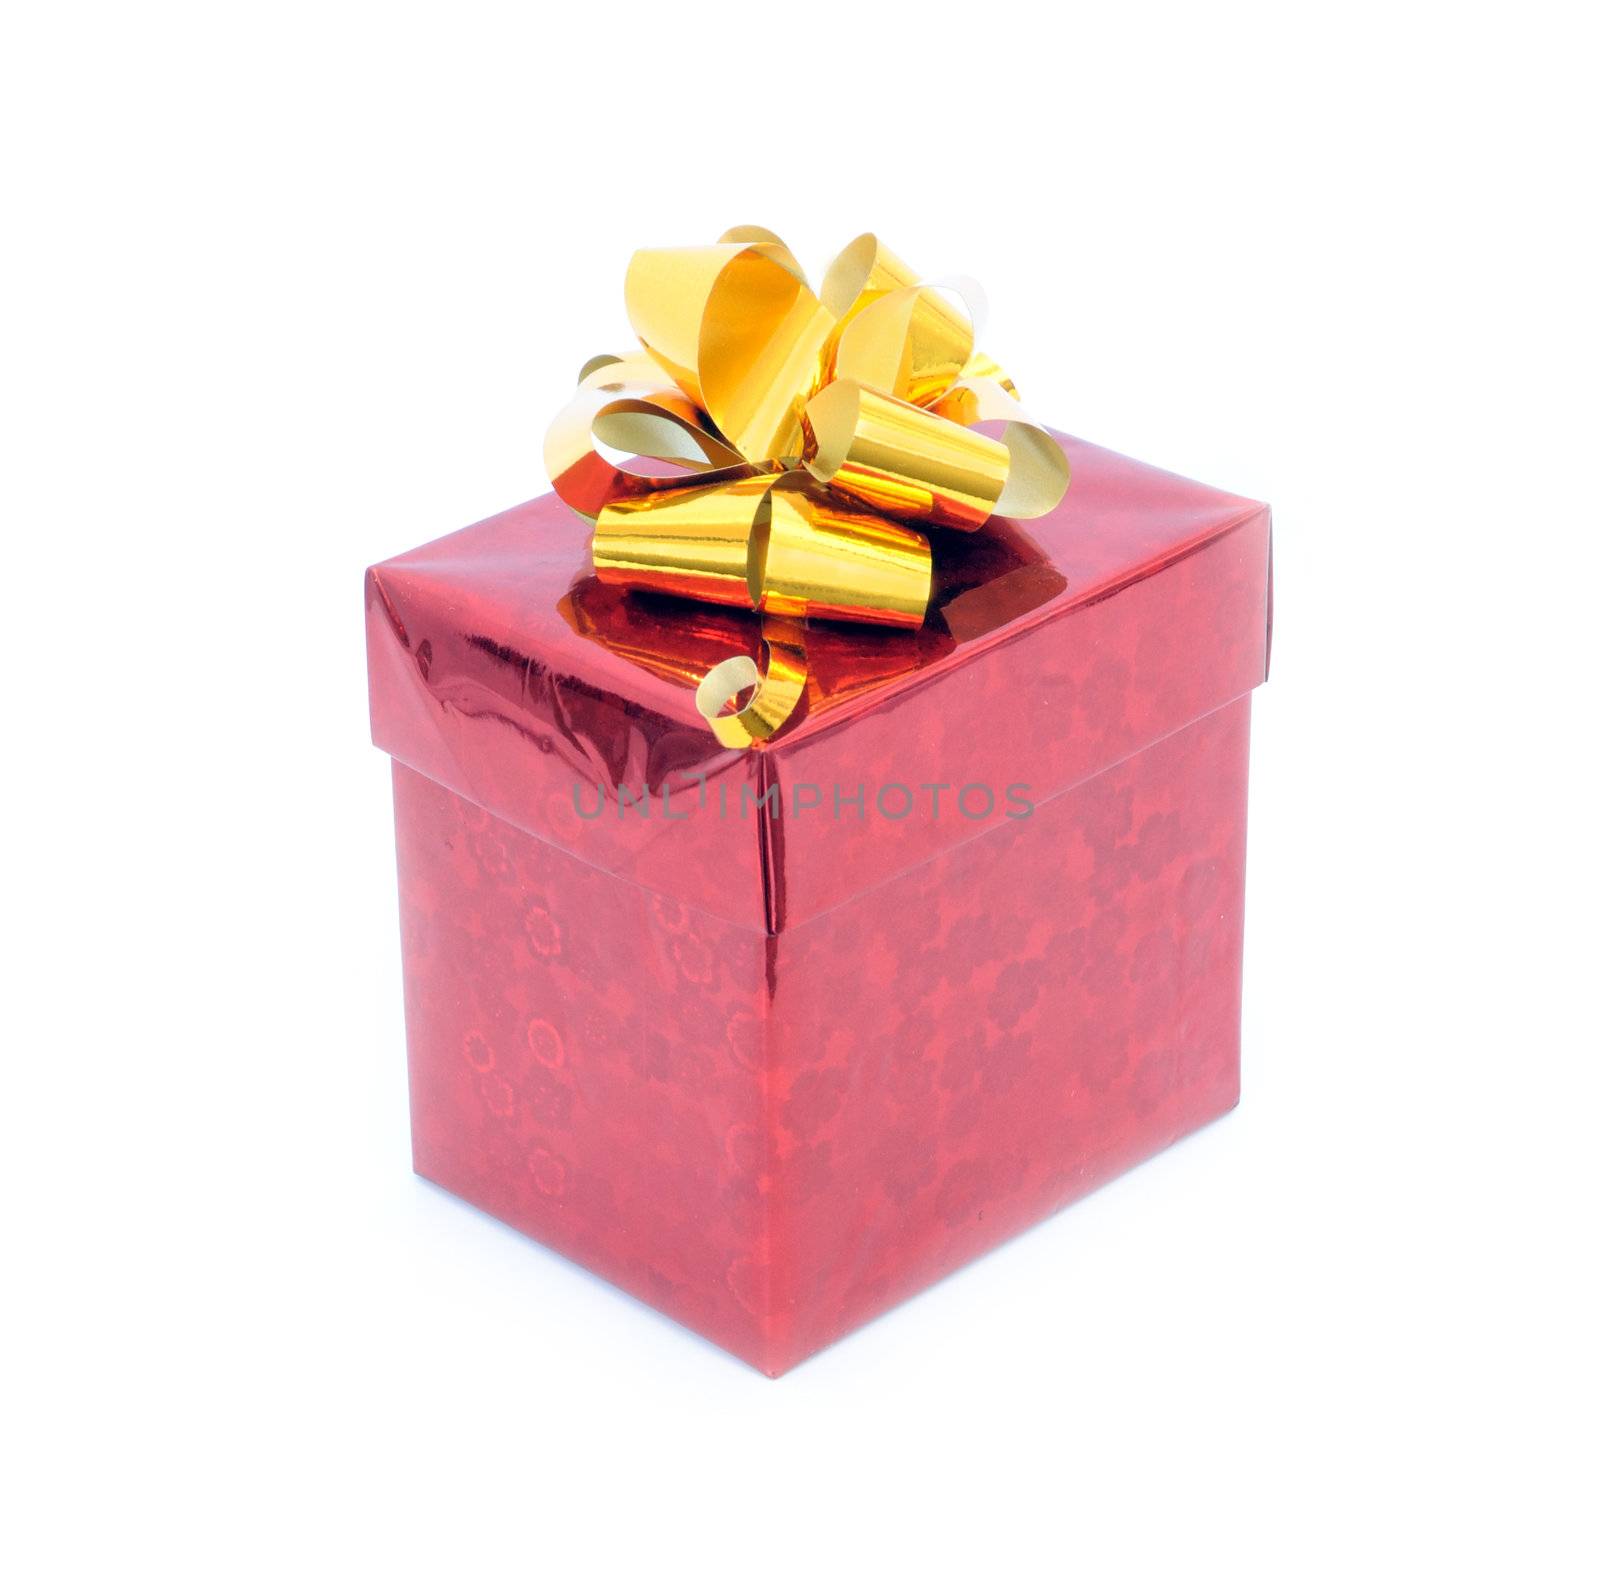 gift box wrapped in red shiny paper